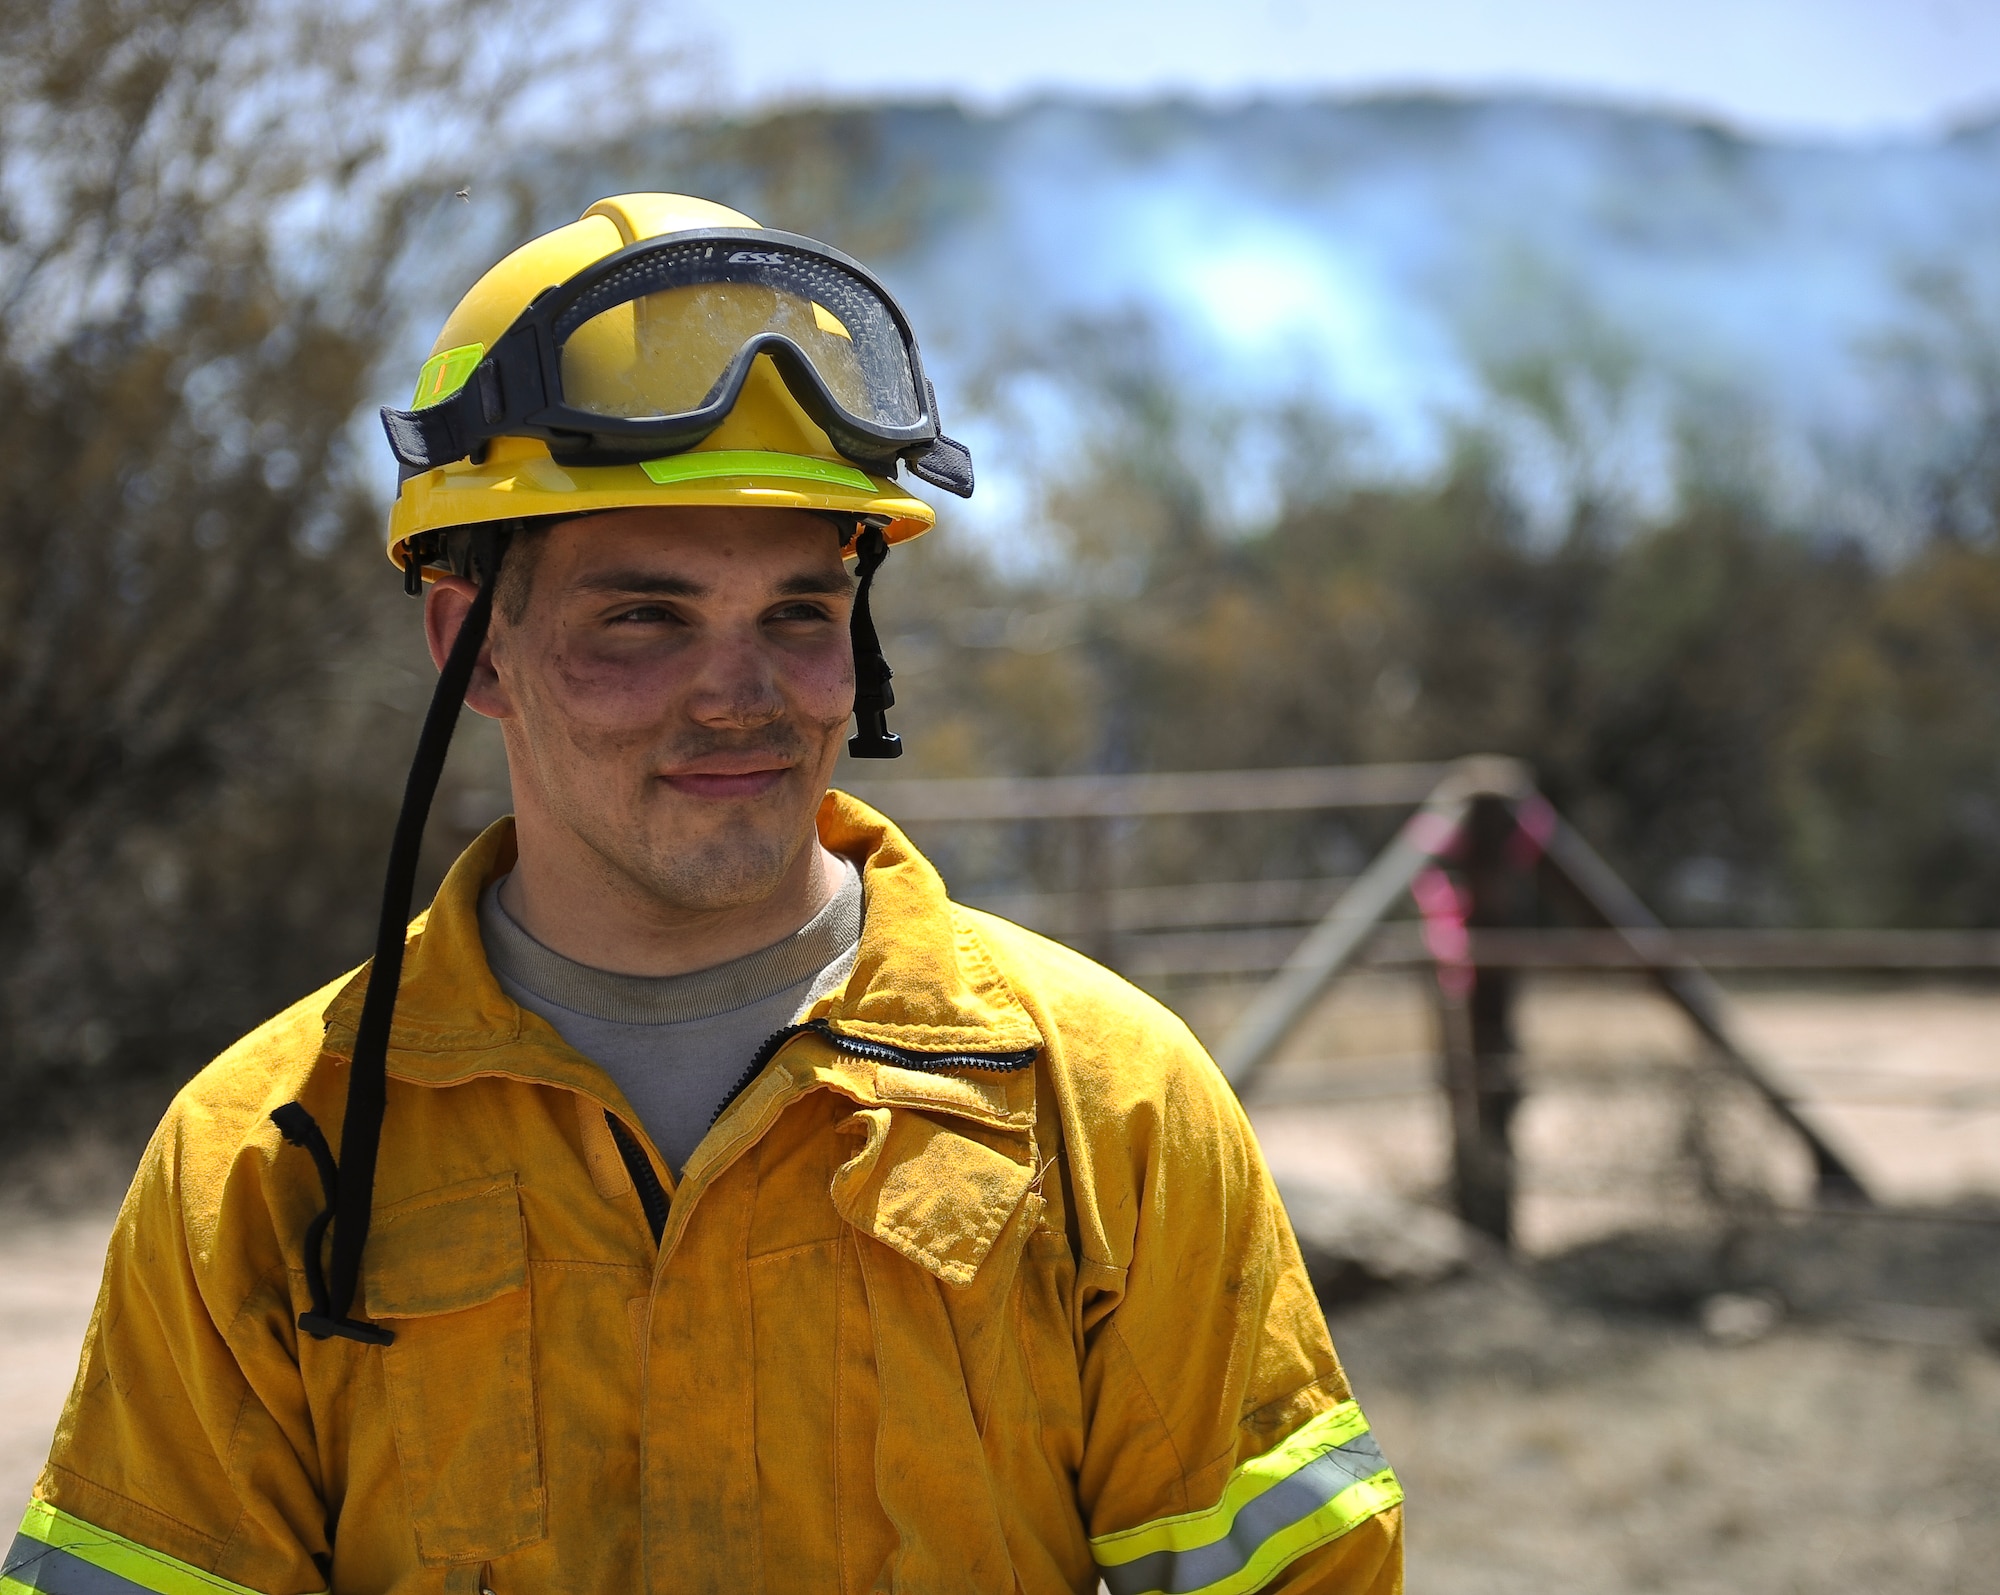 U.S. Air Force Airman 1st Class Richard Thomas, 7th Civil Engineer Squadron firefighter, assisted with the containment of a 1,600 acre wildfire April 28, 2014, near Buffalo Gap, Texas. Seven Dyess firefighters along with numerous other firefighters from the surrounding Big Country region responded to the blaze. (U.S. Air Force photo by Airman 1st Class Kedesha Pennant/Released)